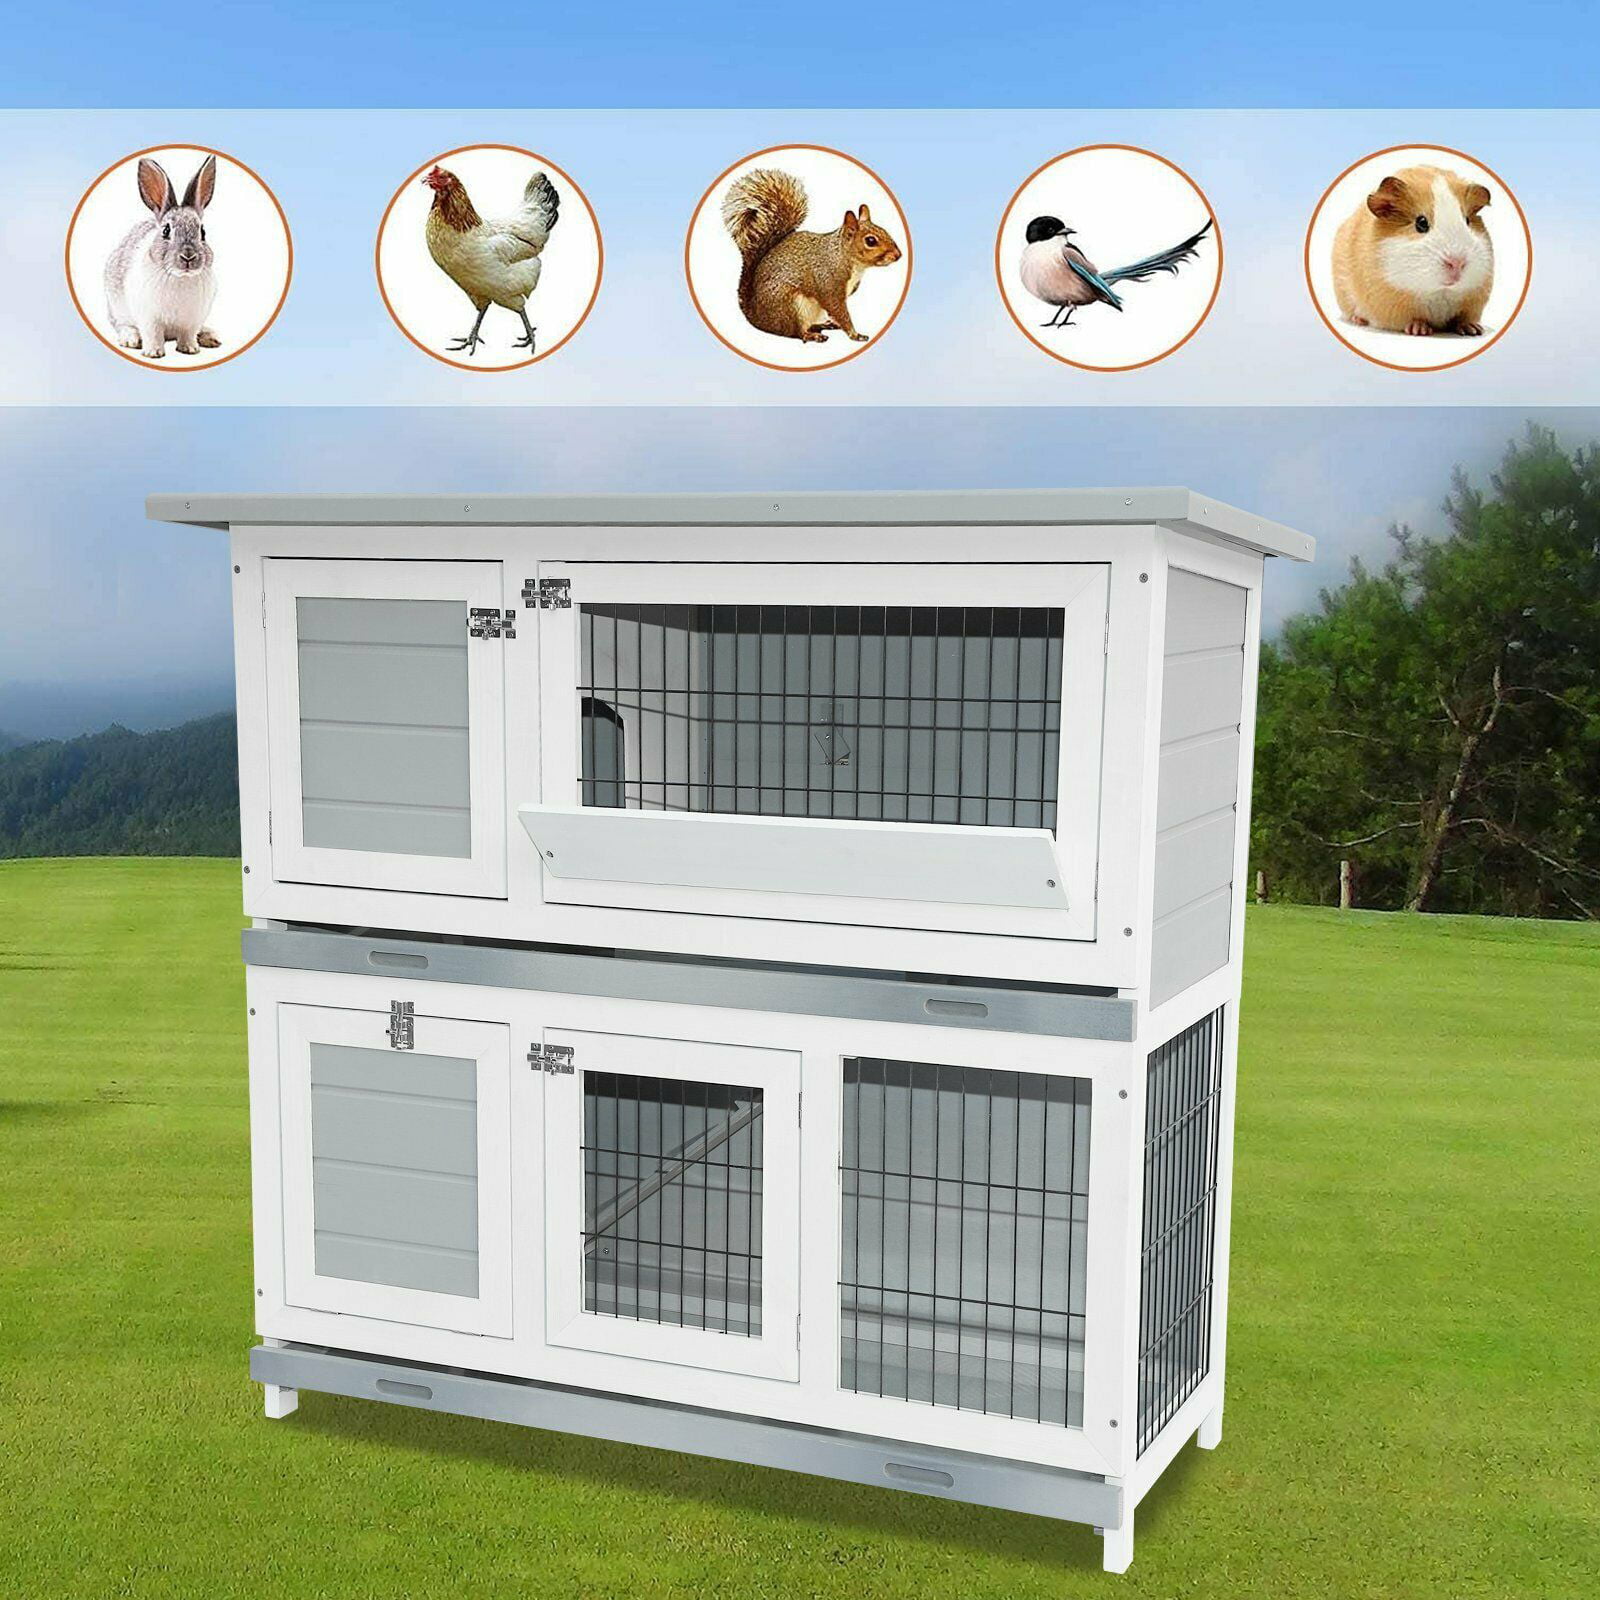 40" Wooden Rabbit Hutch Chicken Coop Cage Hen House Pet Poultry Animal Backyard 